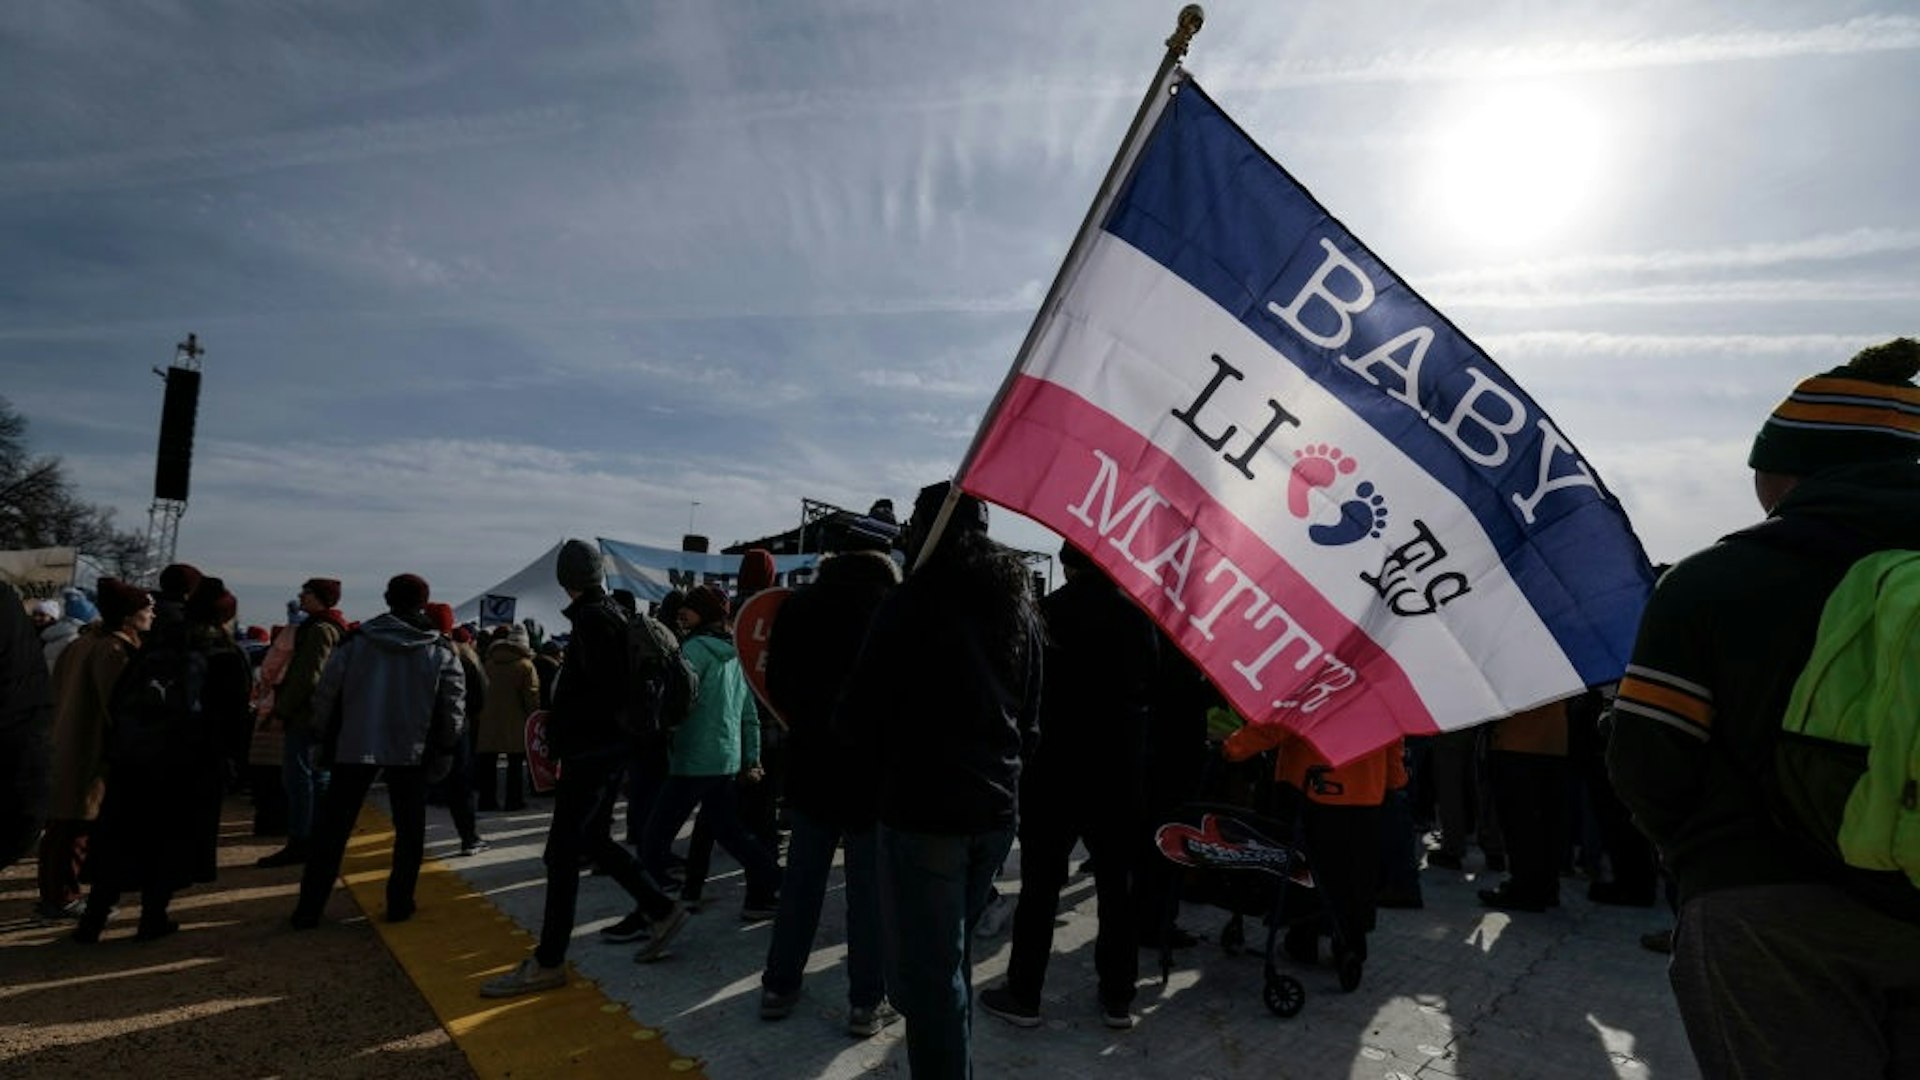 Annual Pro Life Gathering, The March For Life Takes Place In Washington, D.C. WASHINGTON, DC - JANUARY 21: An anti-abortion activist holds a flag saying "Baby Lives Matter" at the 49th annual March for Life rally on the National Mall on January 21, 2022 in Washington, DC. The rally draws activists from around the country who are calling on the U.S. Supreme Court to overturn the Roe v. Wade decision that legalized abortion nationwide. Anna Moneymaker / Staff